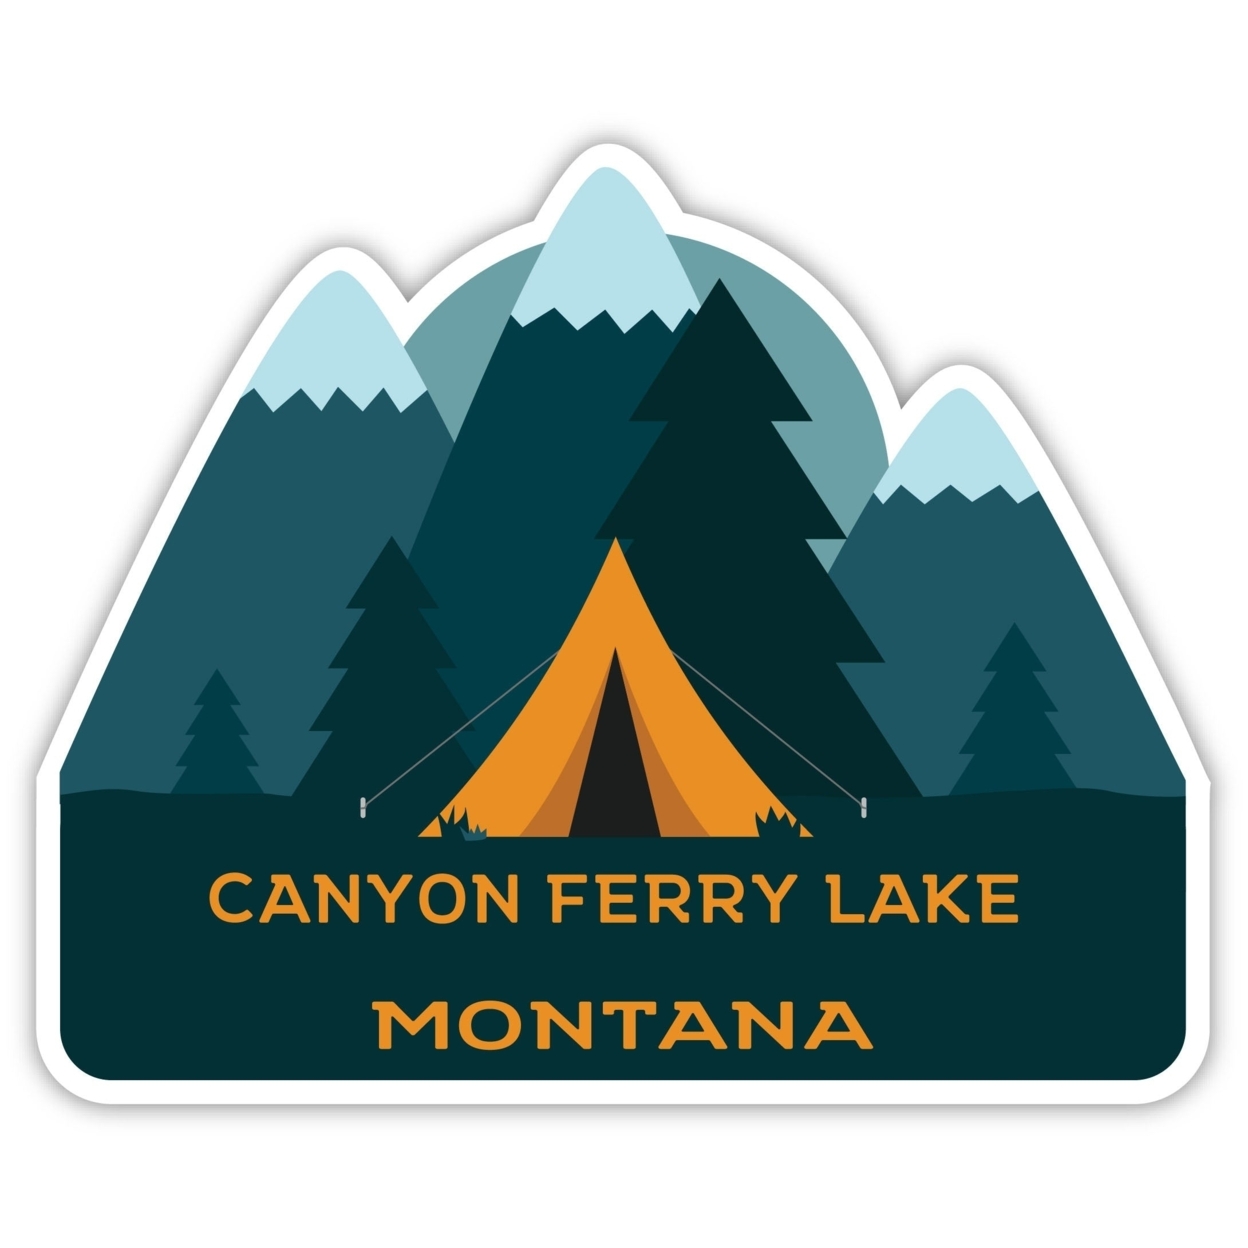 Canyon Ferry Lake Montana Souvenir Decorative Stickers (Choose Theme And Size) - 4-Pack, 6-Inch, Tent